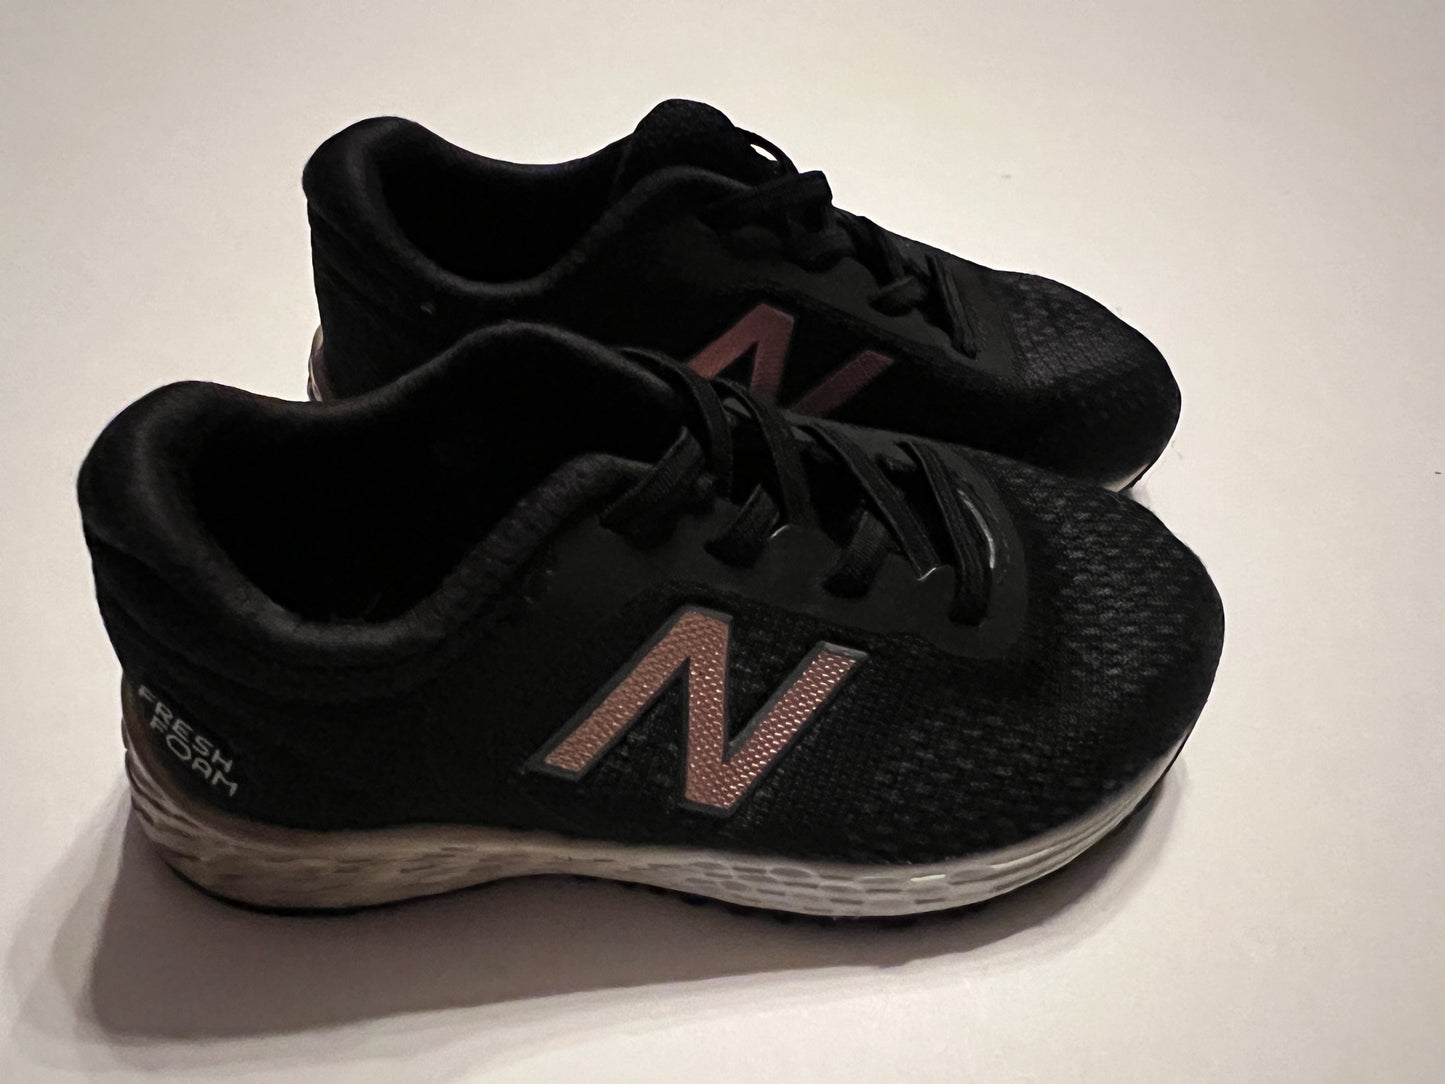 Girls Shoe 7.5 Black New Balance with Rose Gold Accents